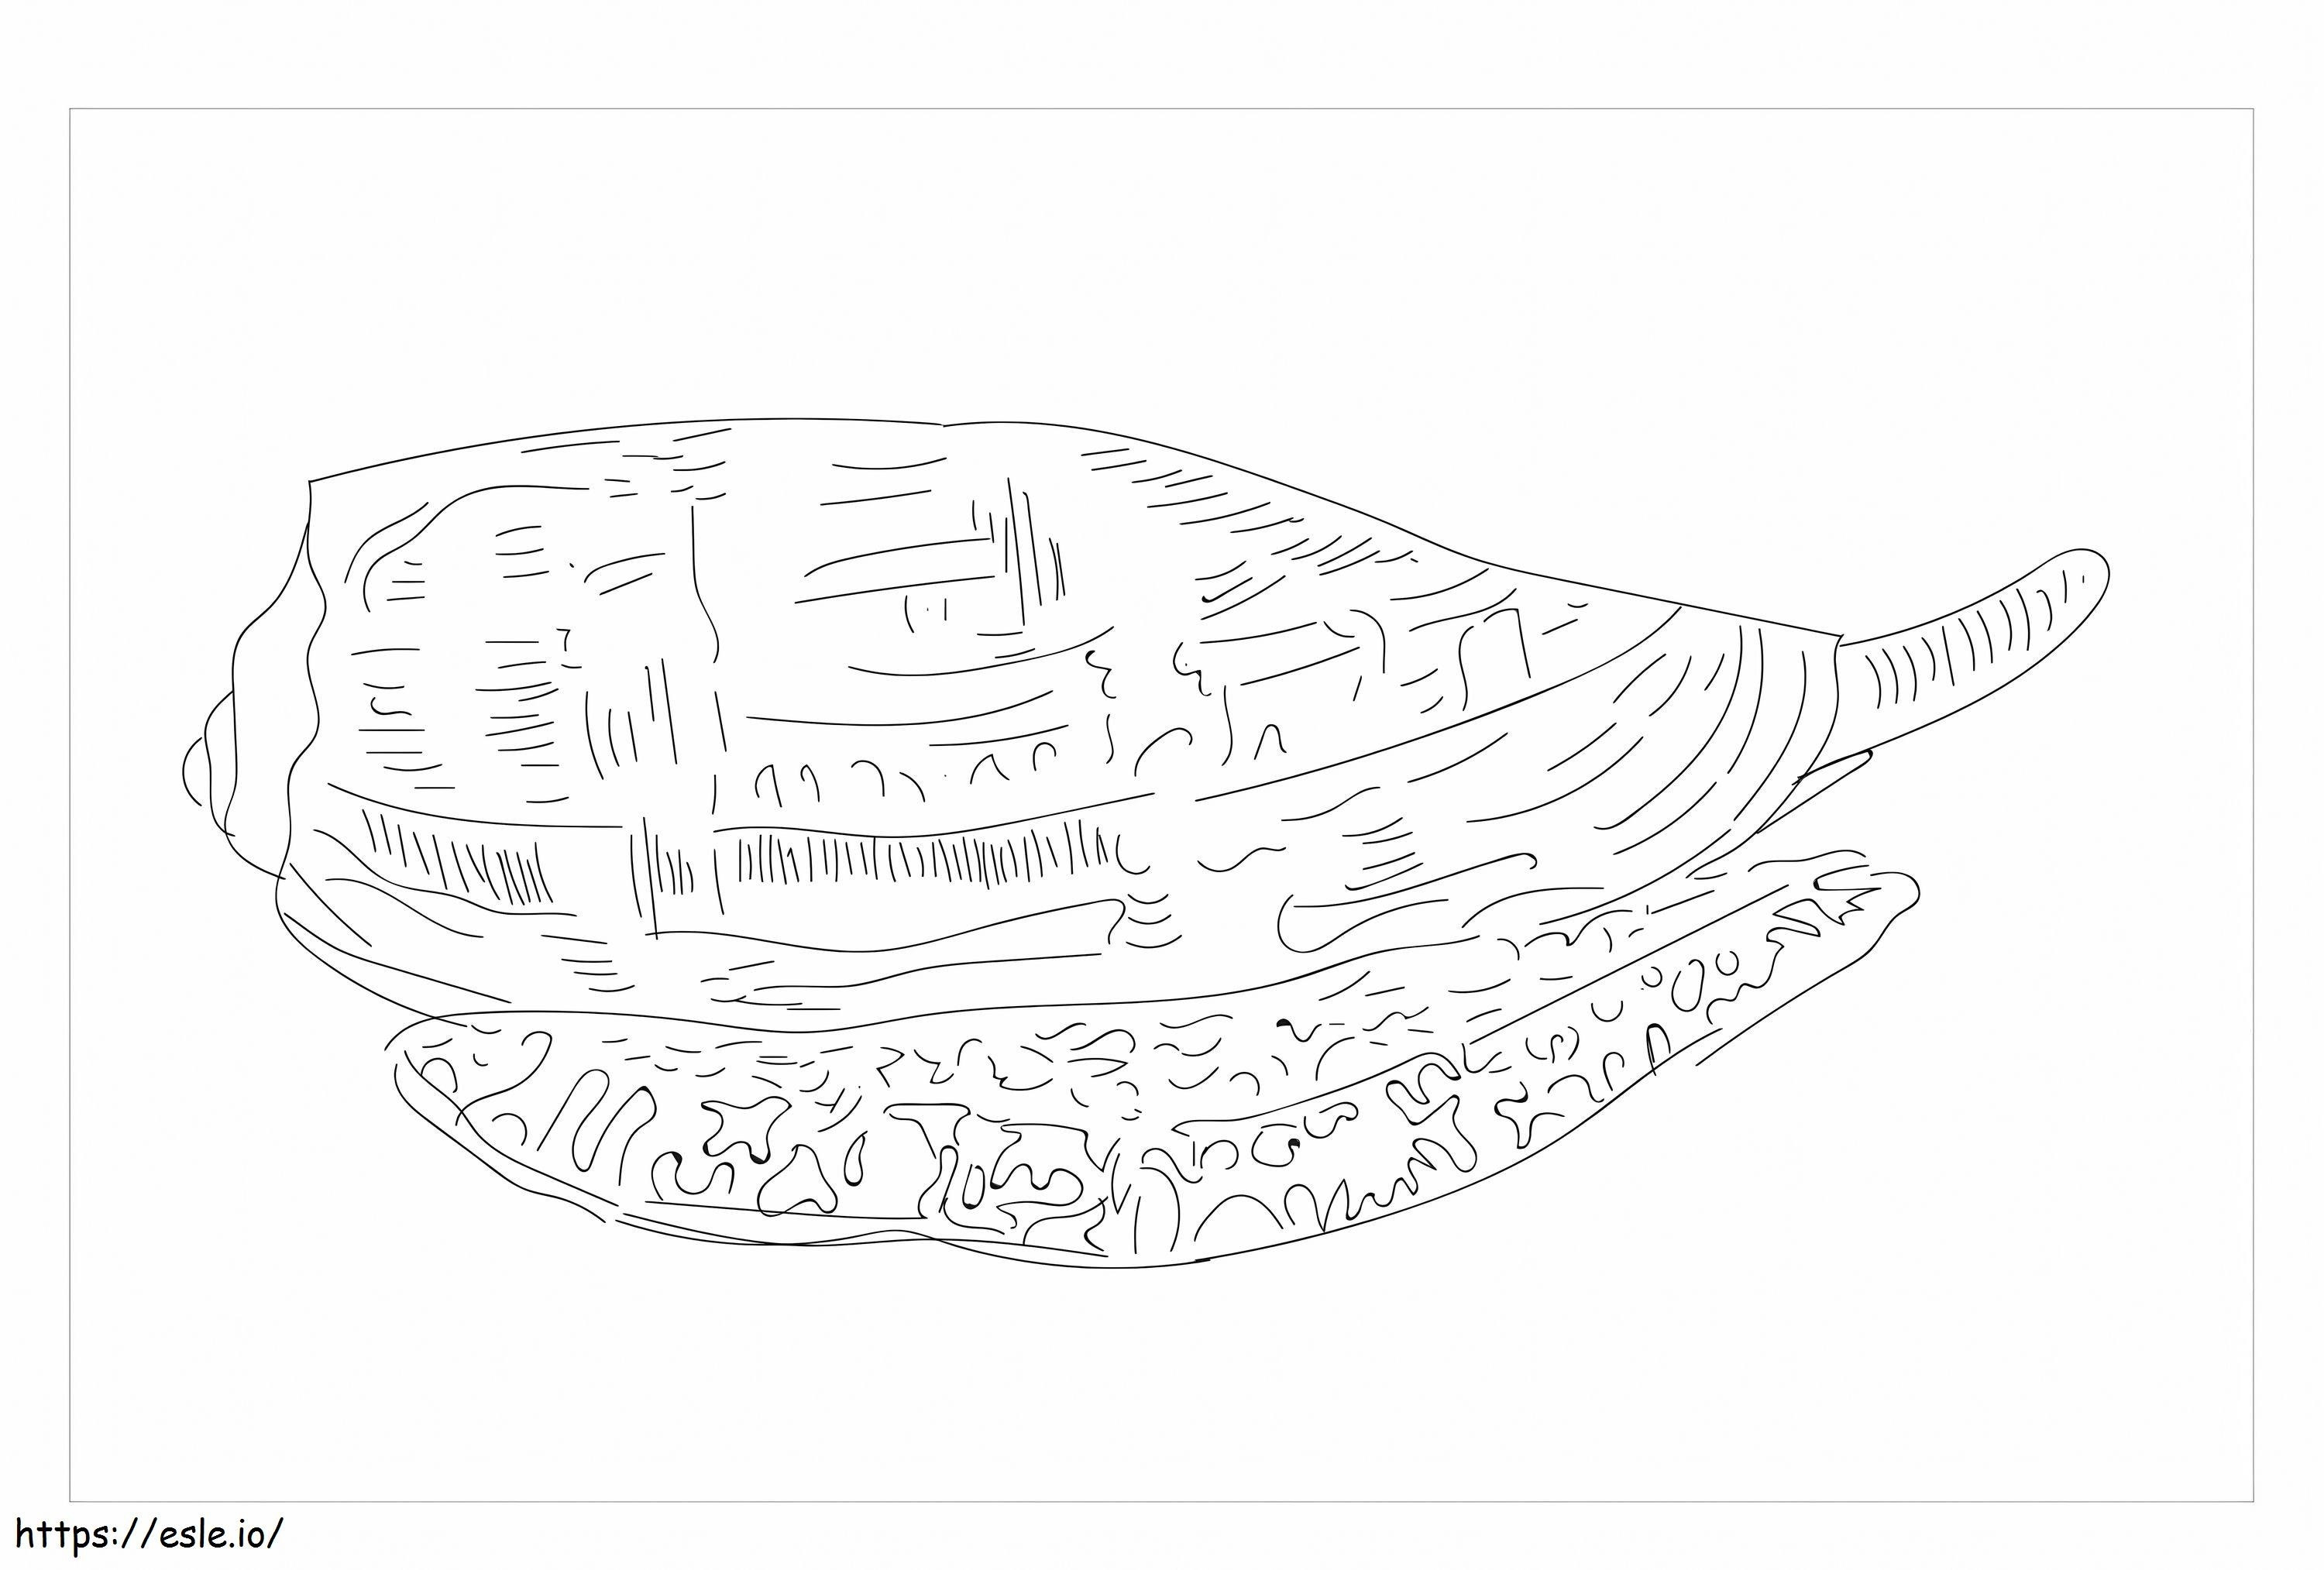 Conical Caracol coloring page